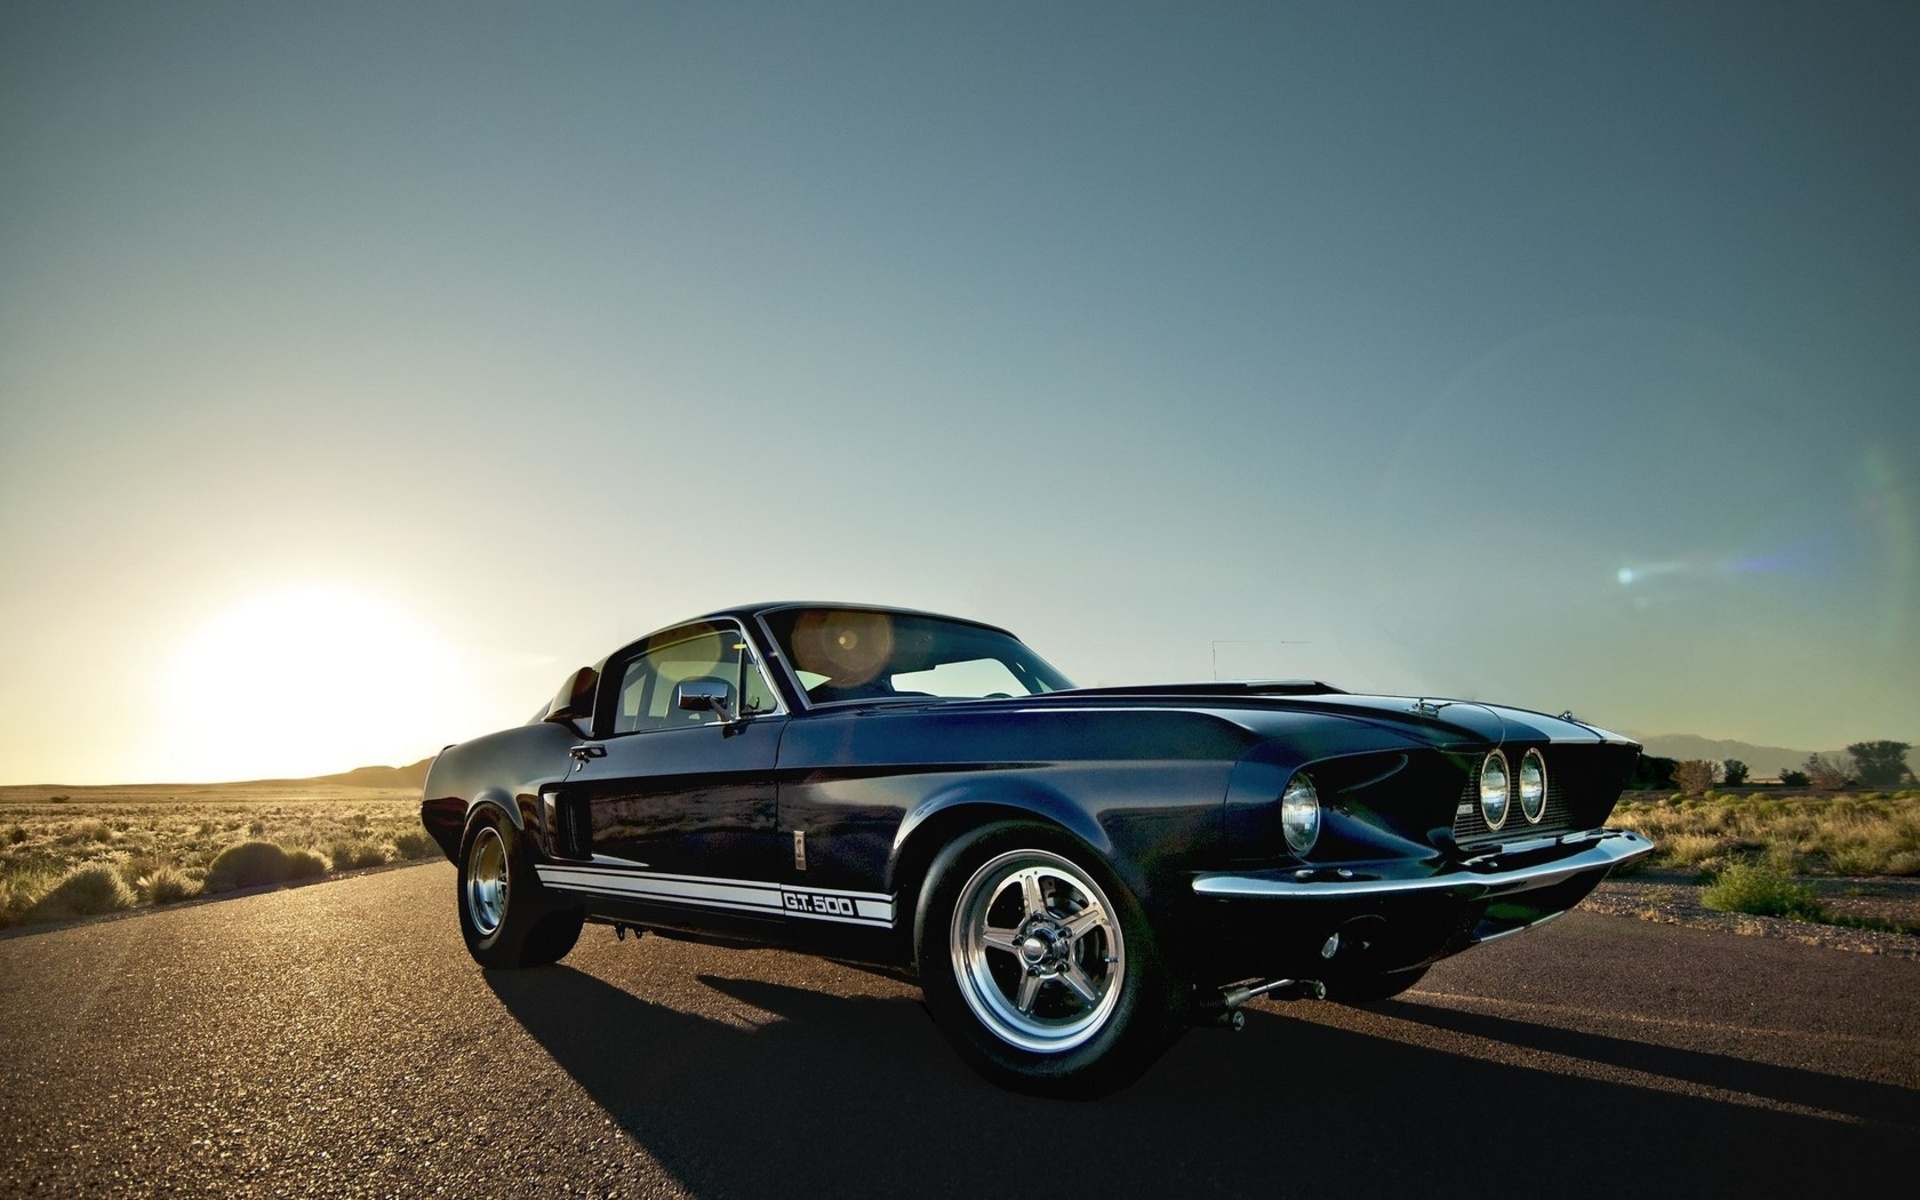 Awesome Classic Car Wallpapers 4k Ultra Hd For Laptop Ford Mustang 1967 Wallpaper Hd 1920x1200 Wallpaper Teahub Io